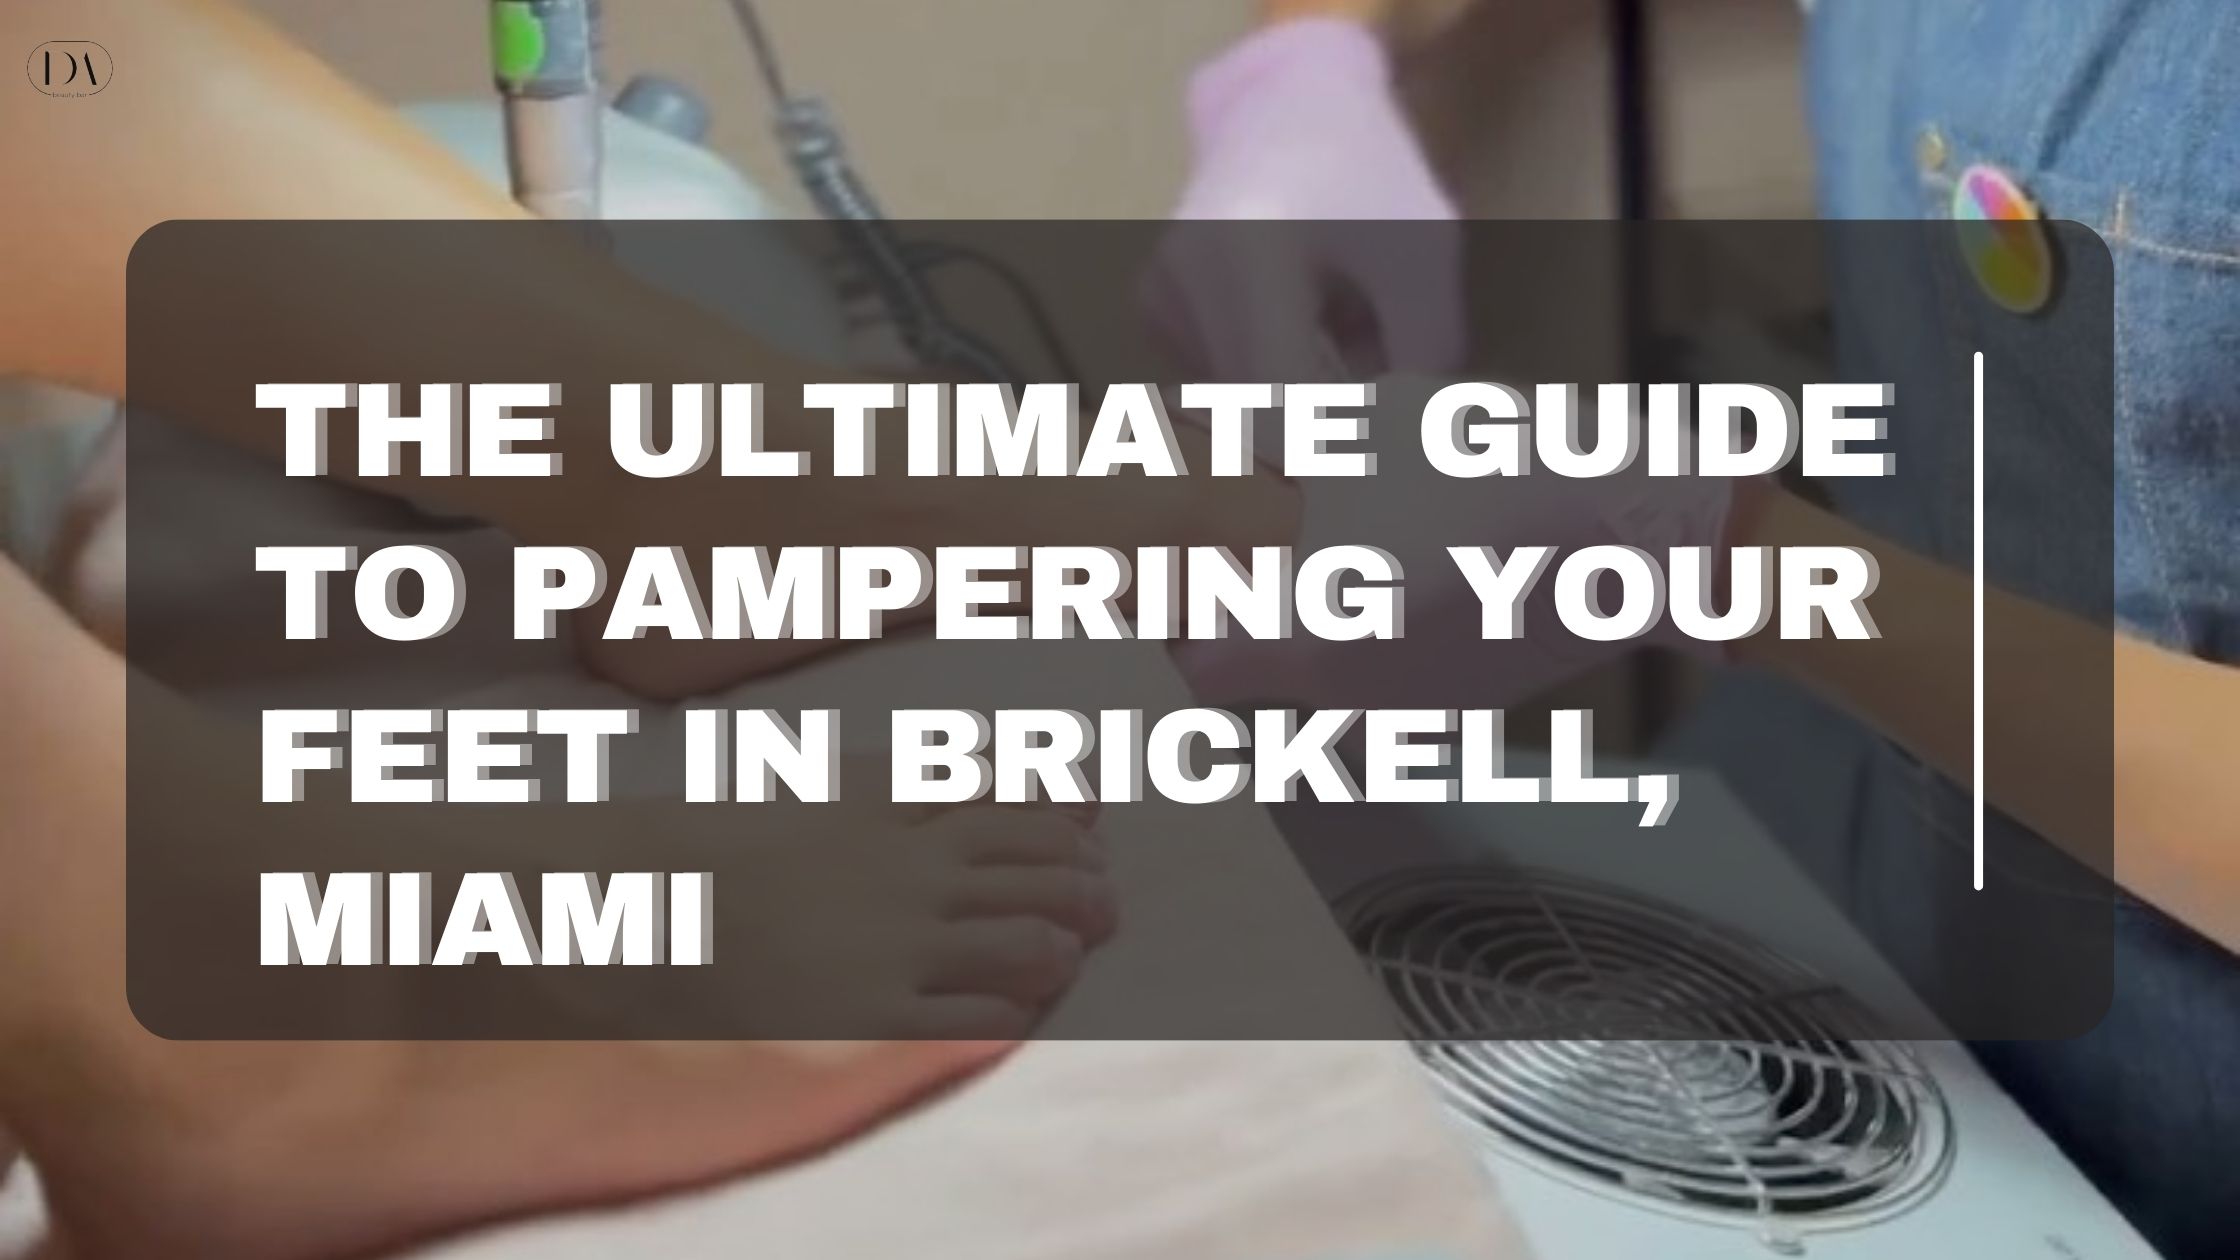 The Ultimate Guide to Pampering Your Feet in Brickell Miami